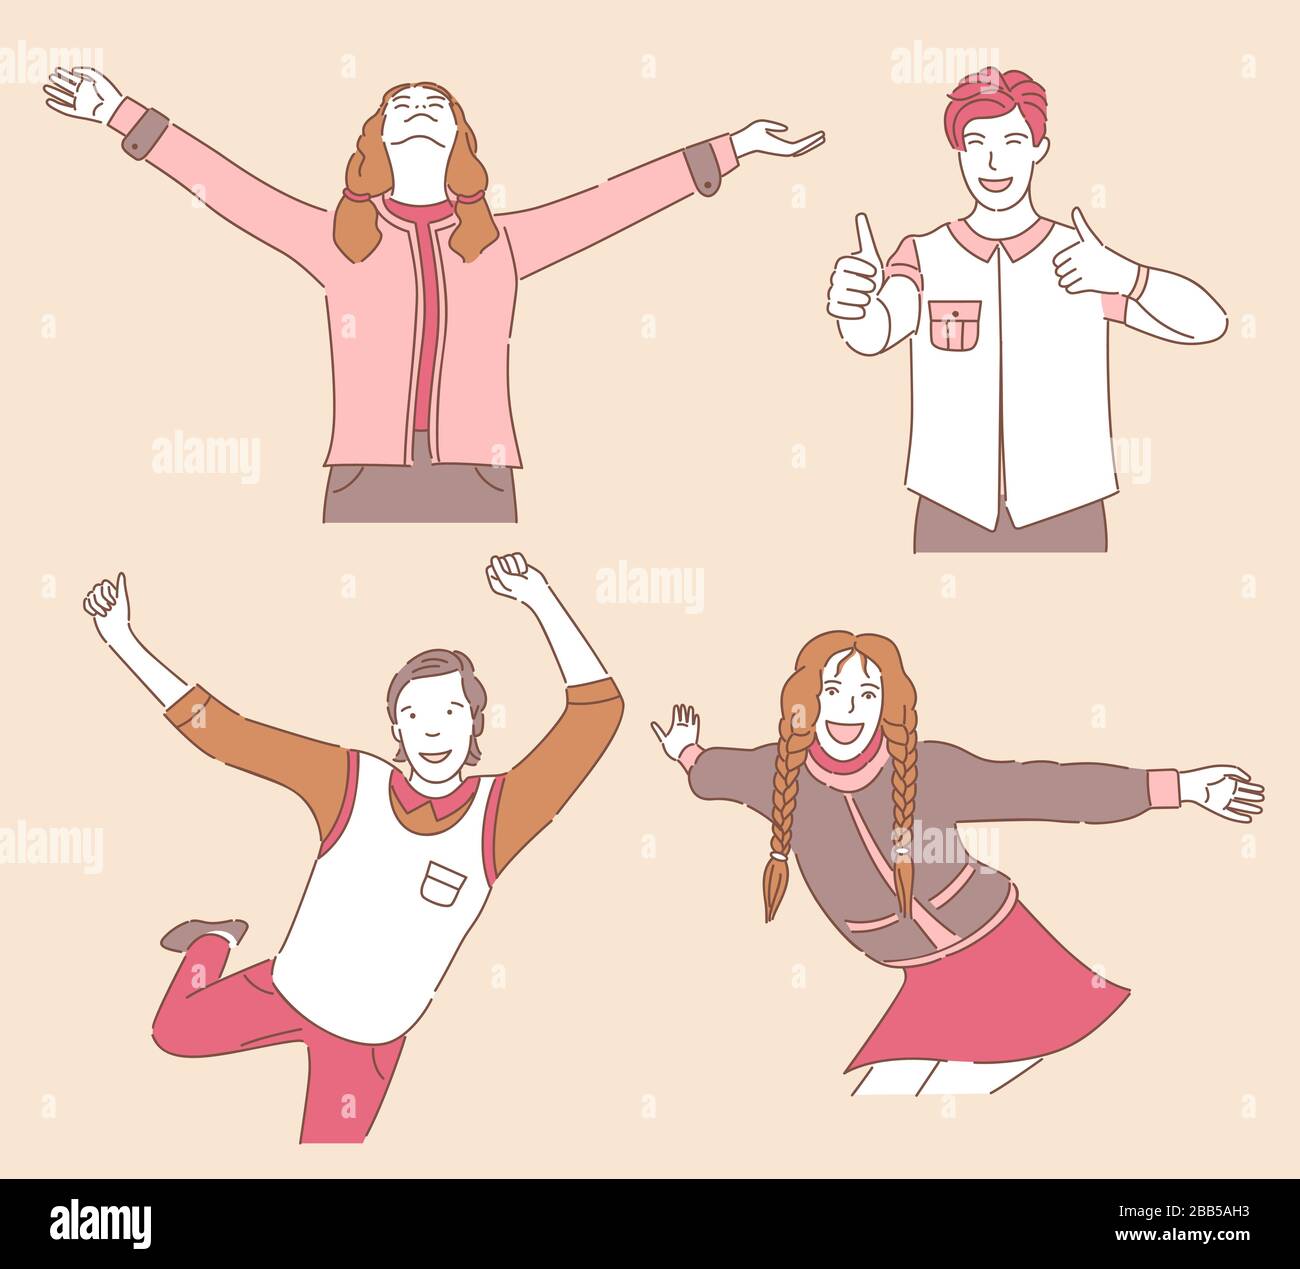 Group of happy smiling young people in casual clothes dancing, enjoying, showing thumbs up and standing with open arms for hug. Cheerful expressions, men and women vector outline characters. Stock Vector